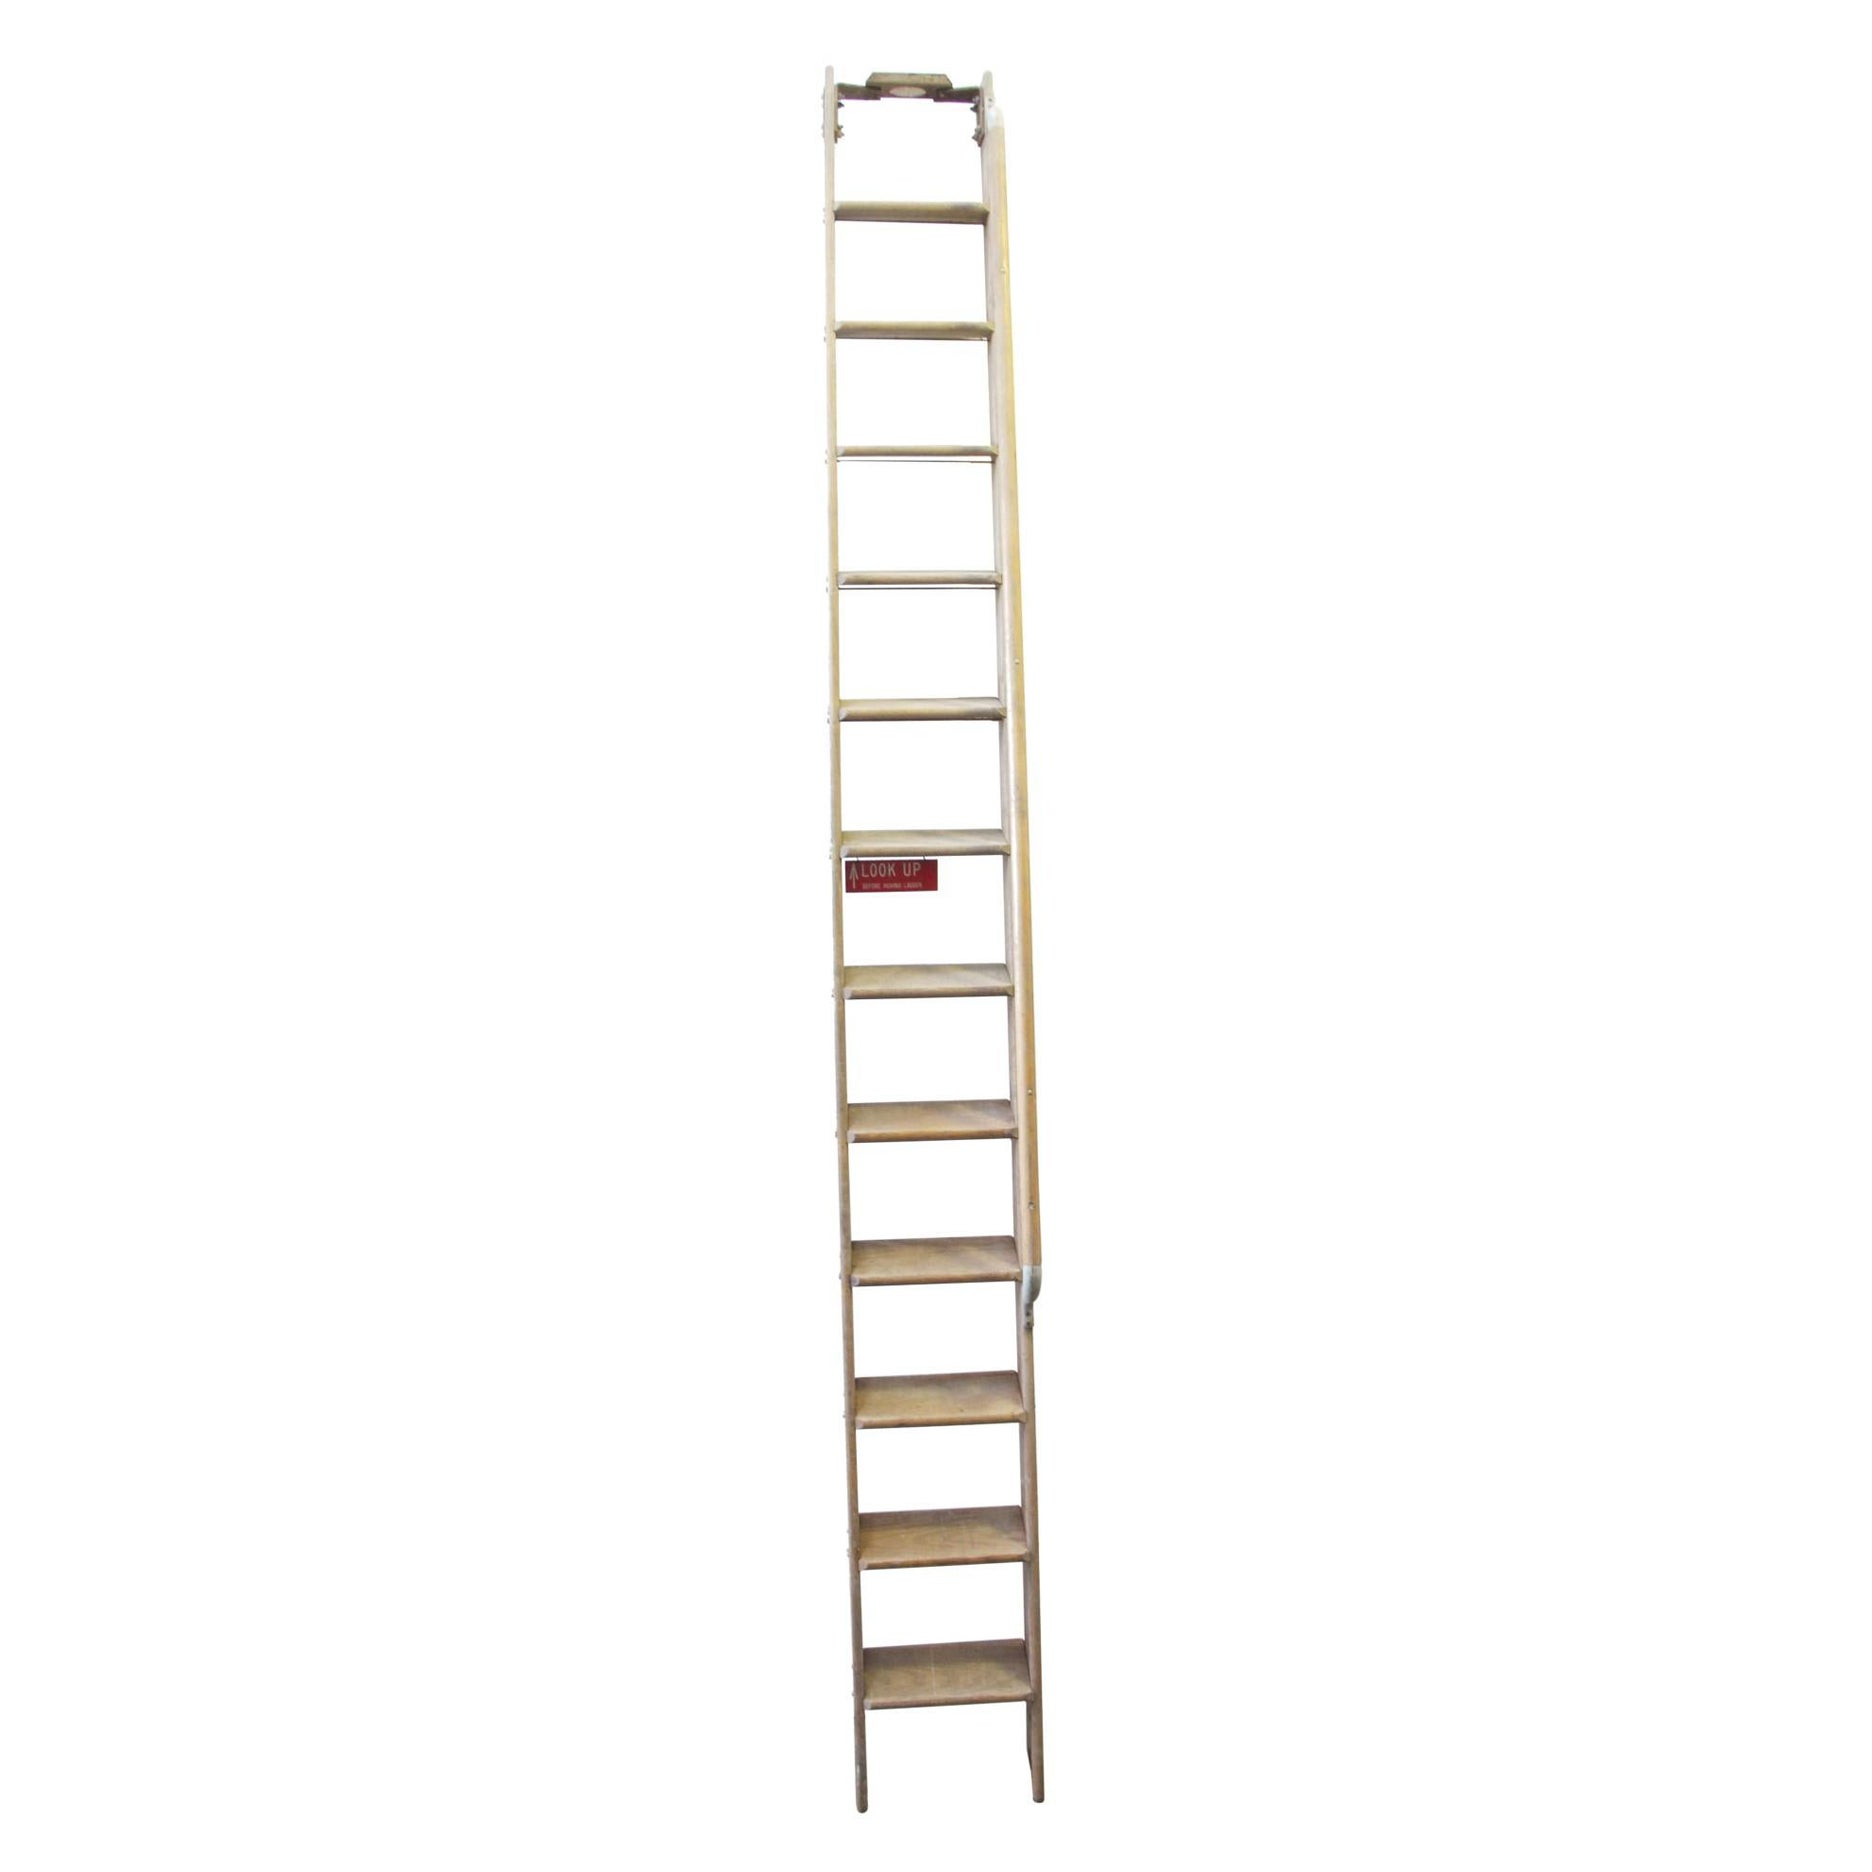 Solid Oak Wood Library Ladder with Wood Handrail